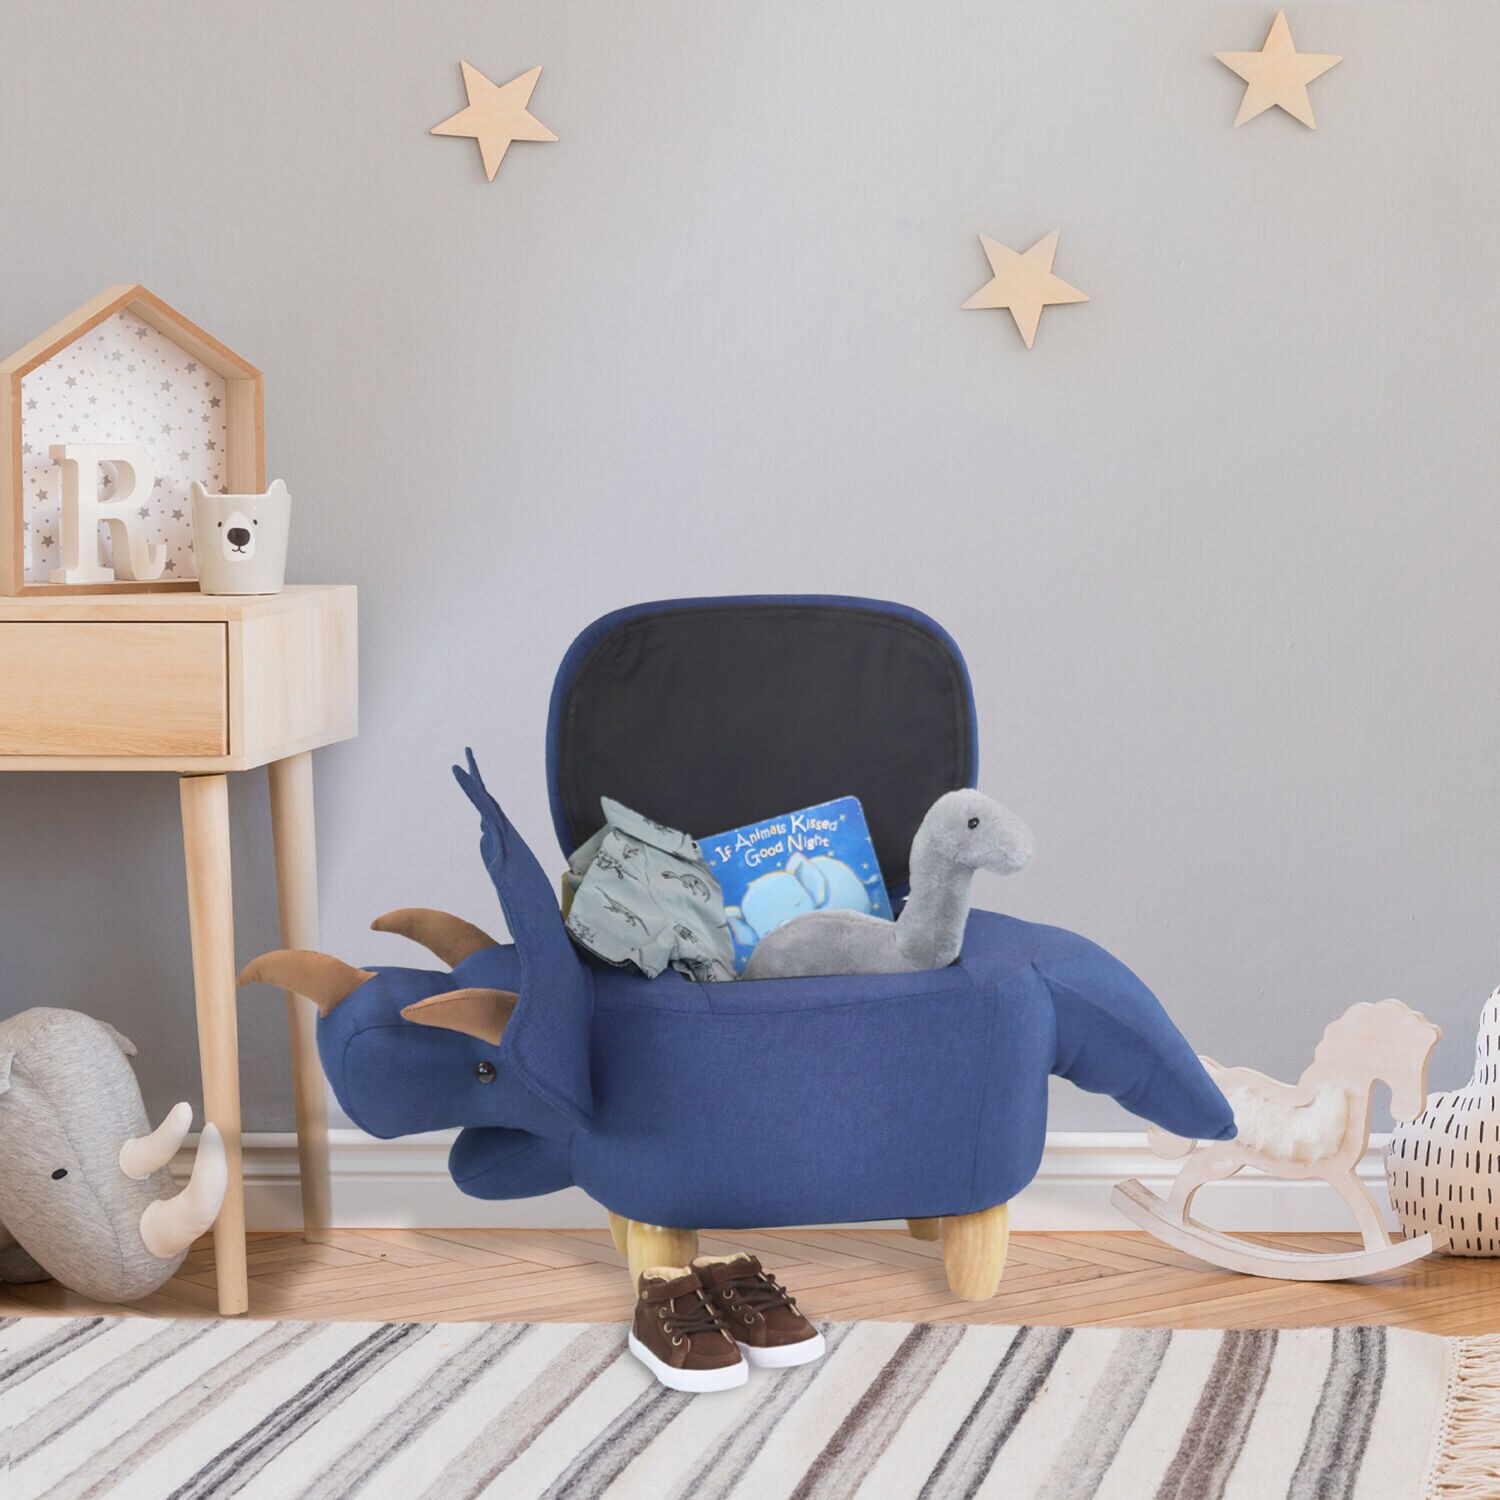 Critter Sitters Denim Blue Animal-Shaped Kids Accent Chair with Storage -  Fun and Stylish Furniture for Nursery or Playroom in the Kids Chairs  department at